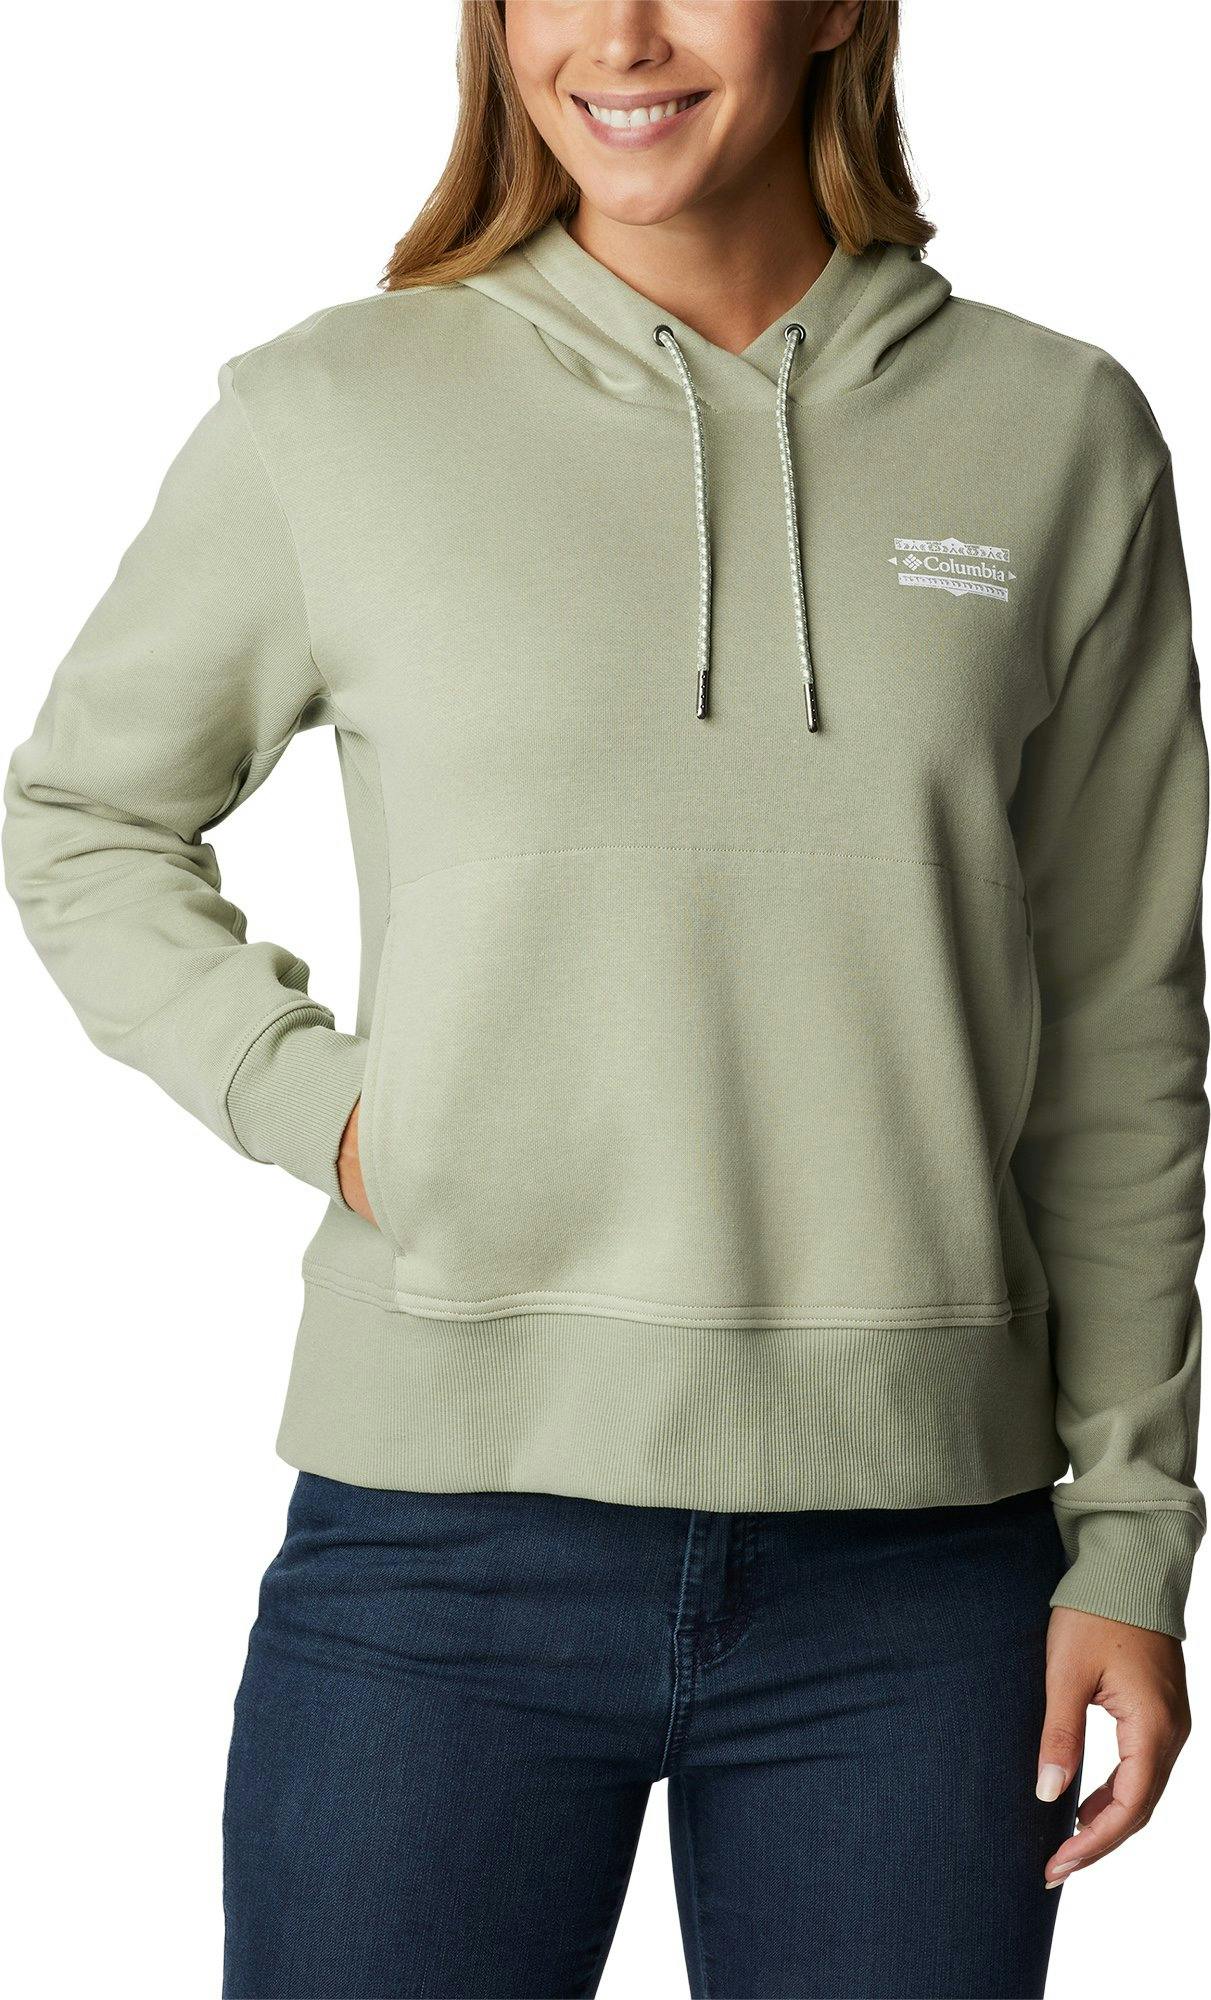 Product image for Lodge Hoodie - Women's